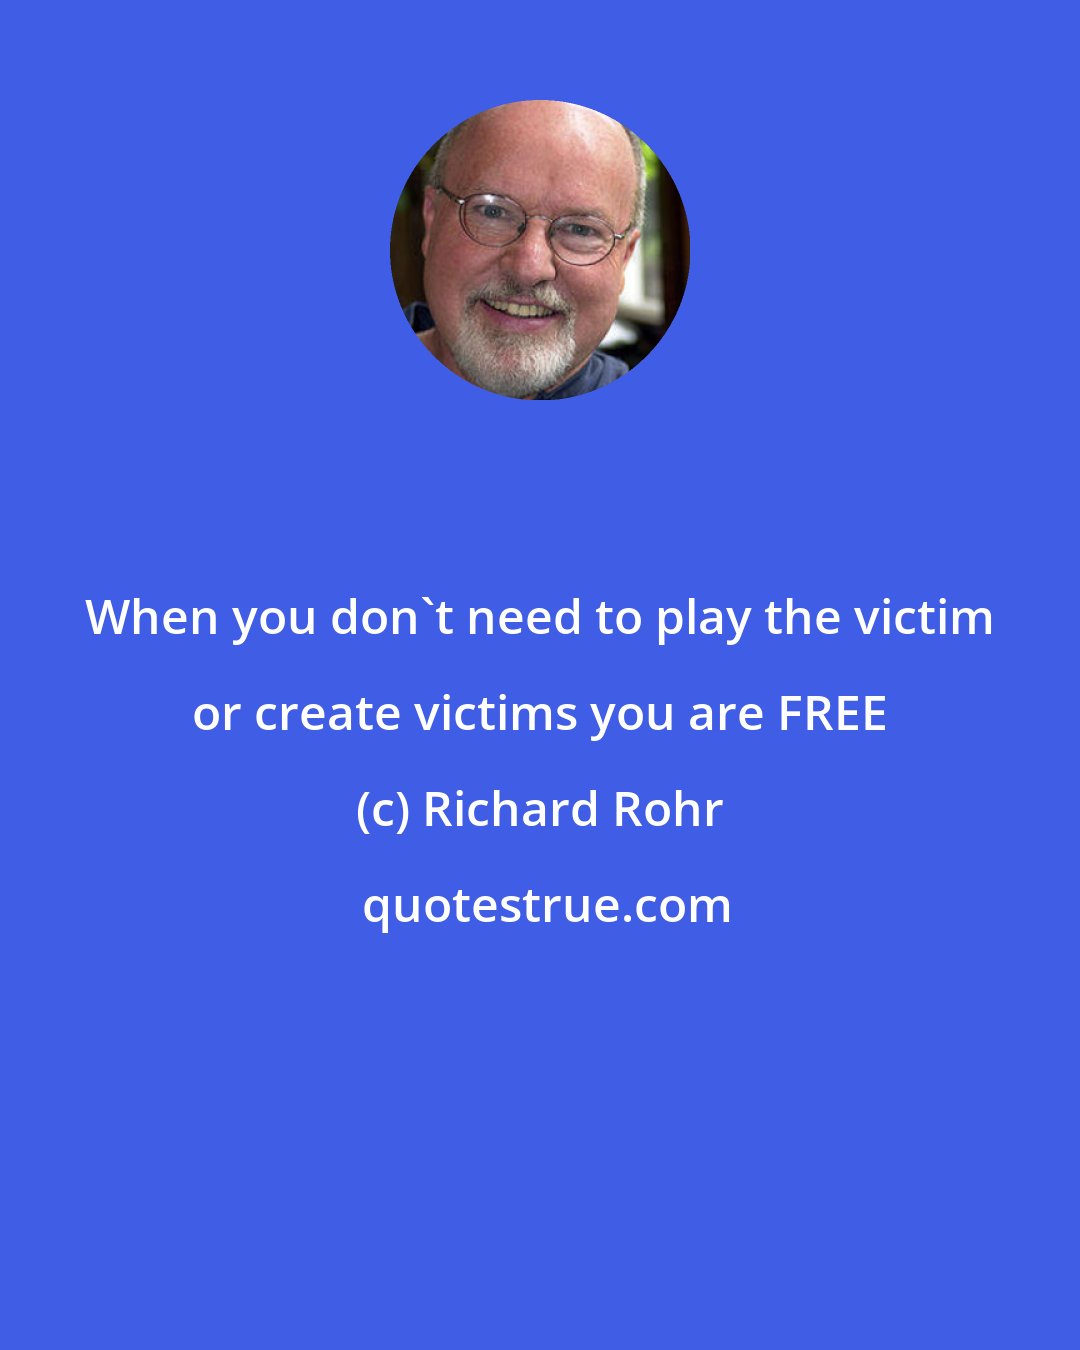 Richard Rohr: When you don't need to play the victim or create victims you are FREE